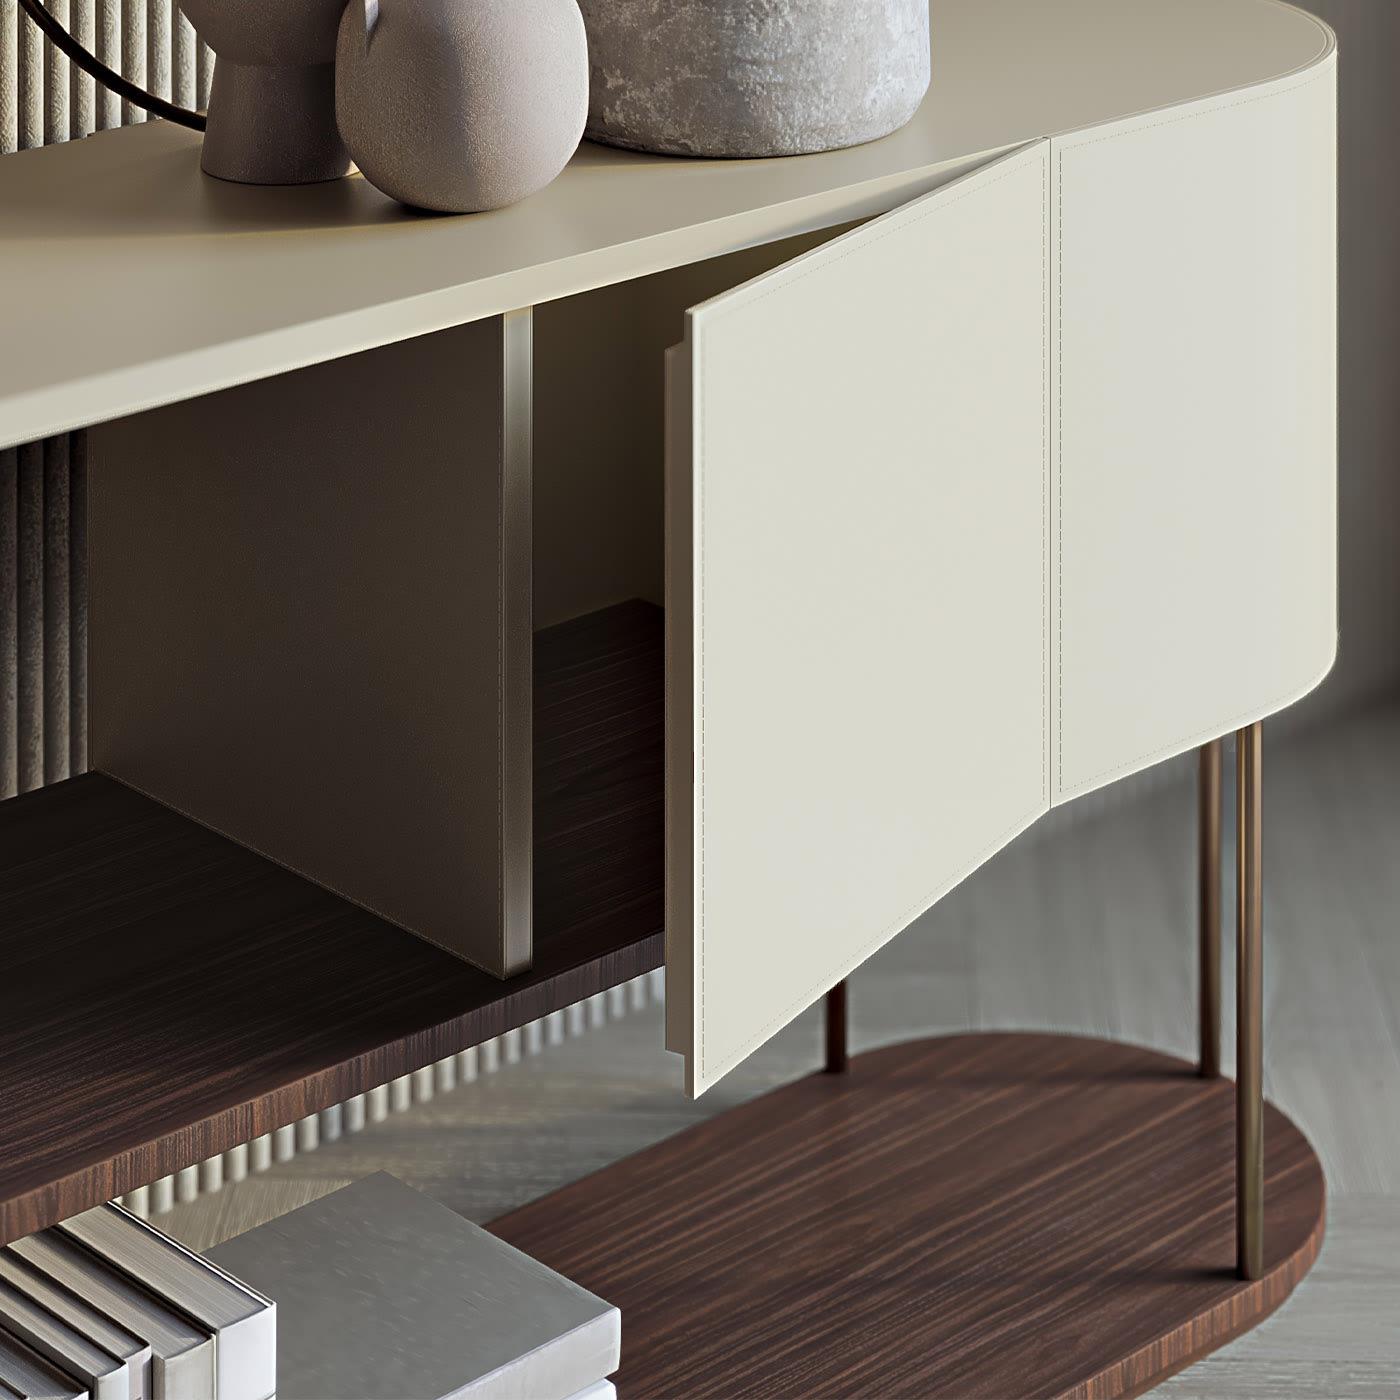 Low and double-sided version of the Gae sideboard in Canaletto walnut and leather with metal supports available in bronze-gold, lead, and burnished finishes. Equipped with openable boxes. Also available in light Tay and dark Tay wood.